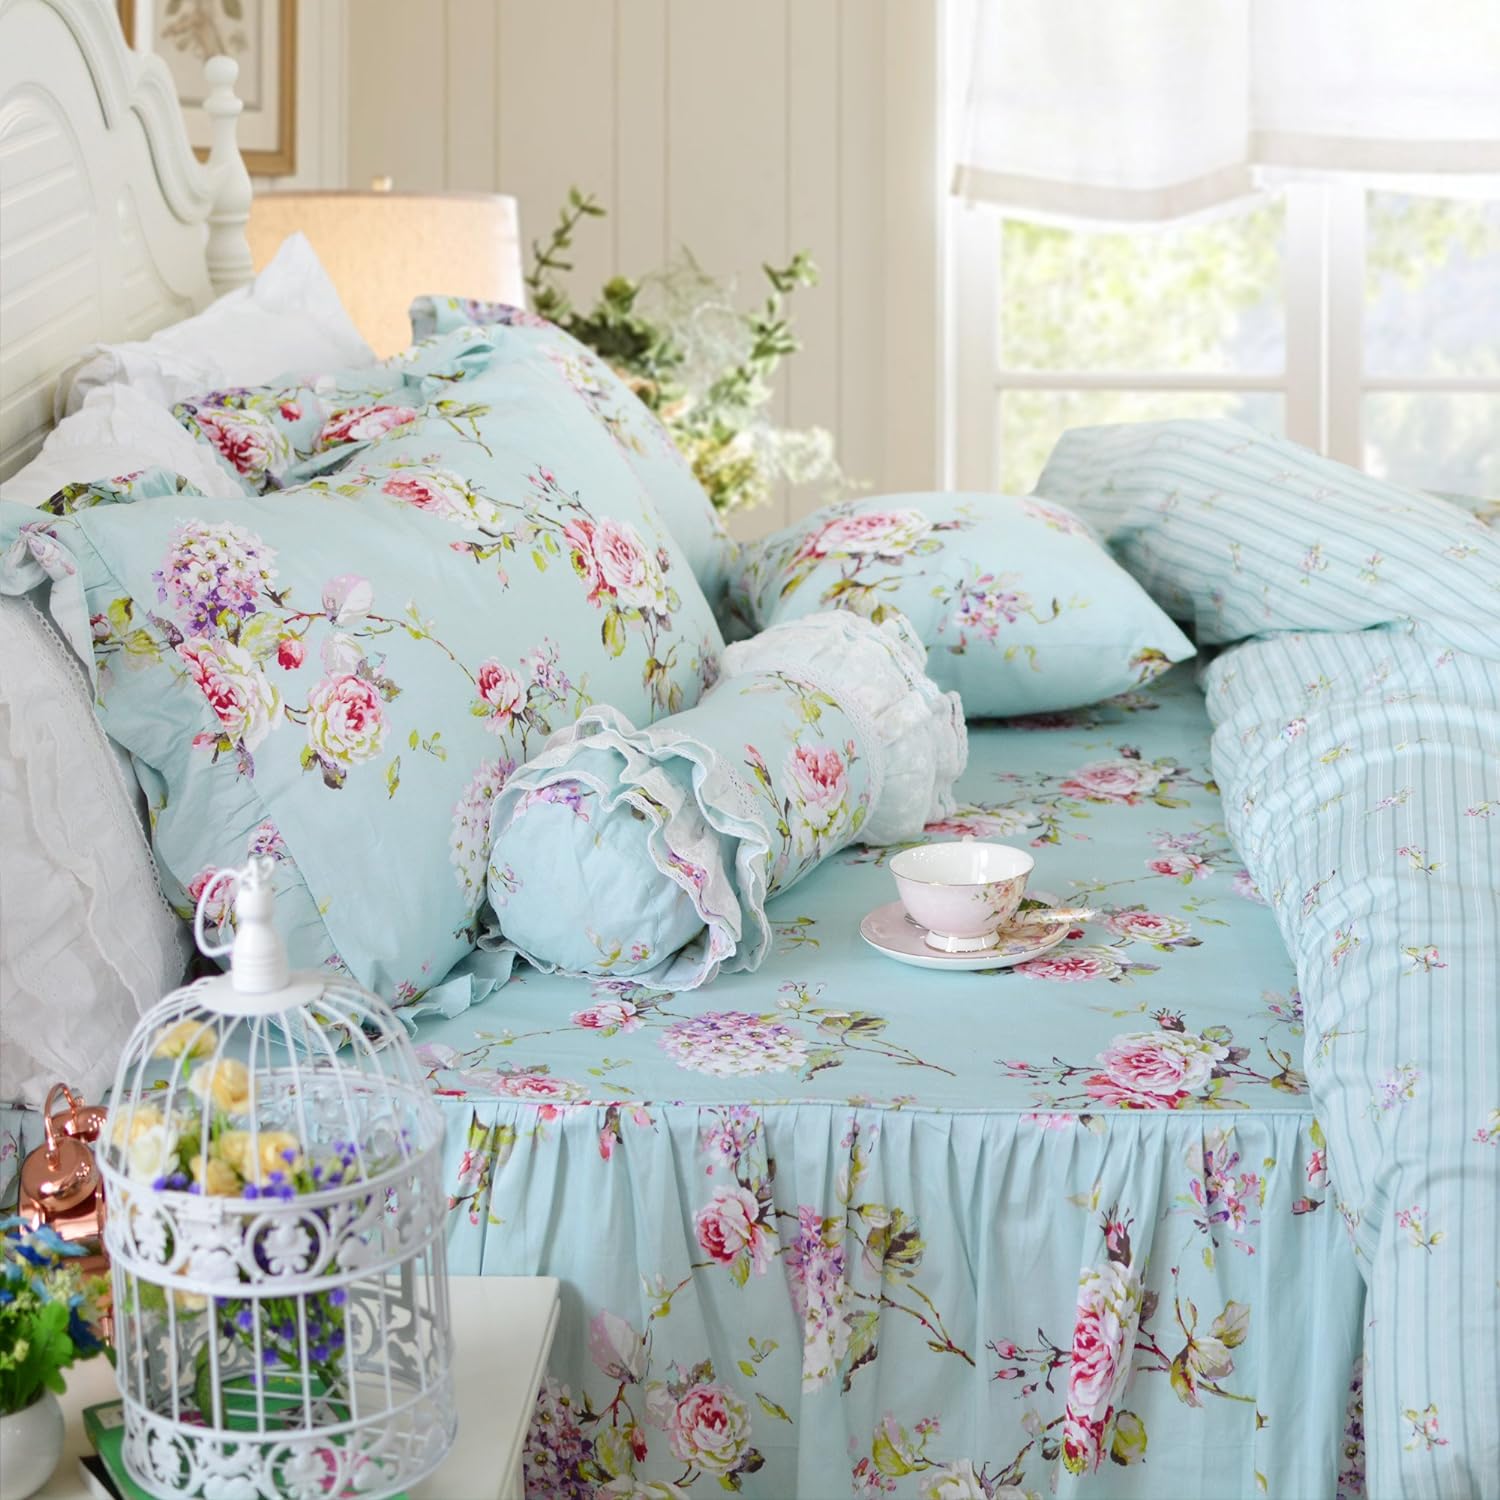 FADFAY Shabby Floral Bedding Full Size Premium 100% Cotton Vintage Hydrangea Pint Duvet Cover Set with Bedskirt French Country Style with Ruffle 4 Pcs1 Bedskirt1 Duvet Cover2 Pillowshams